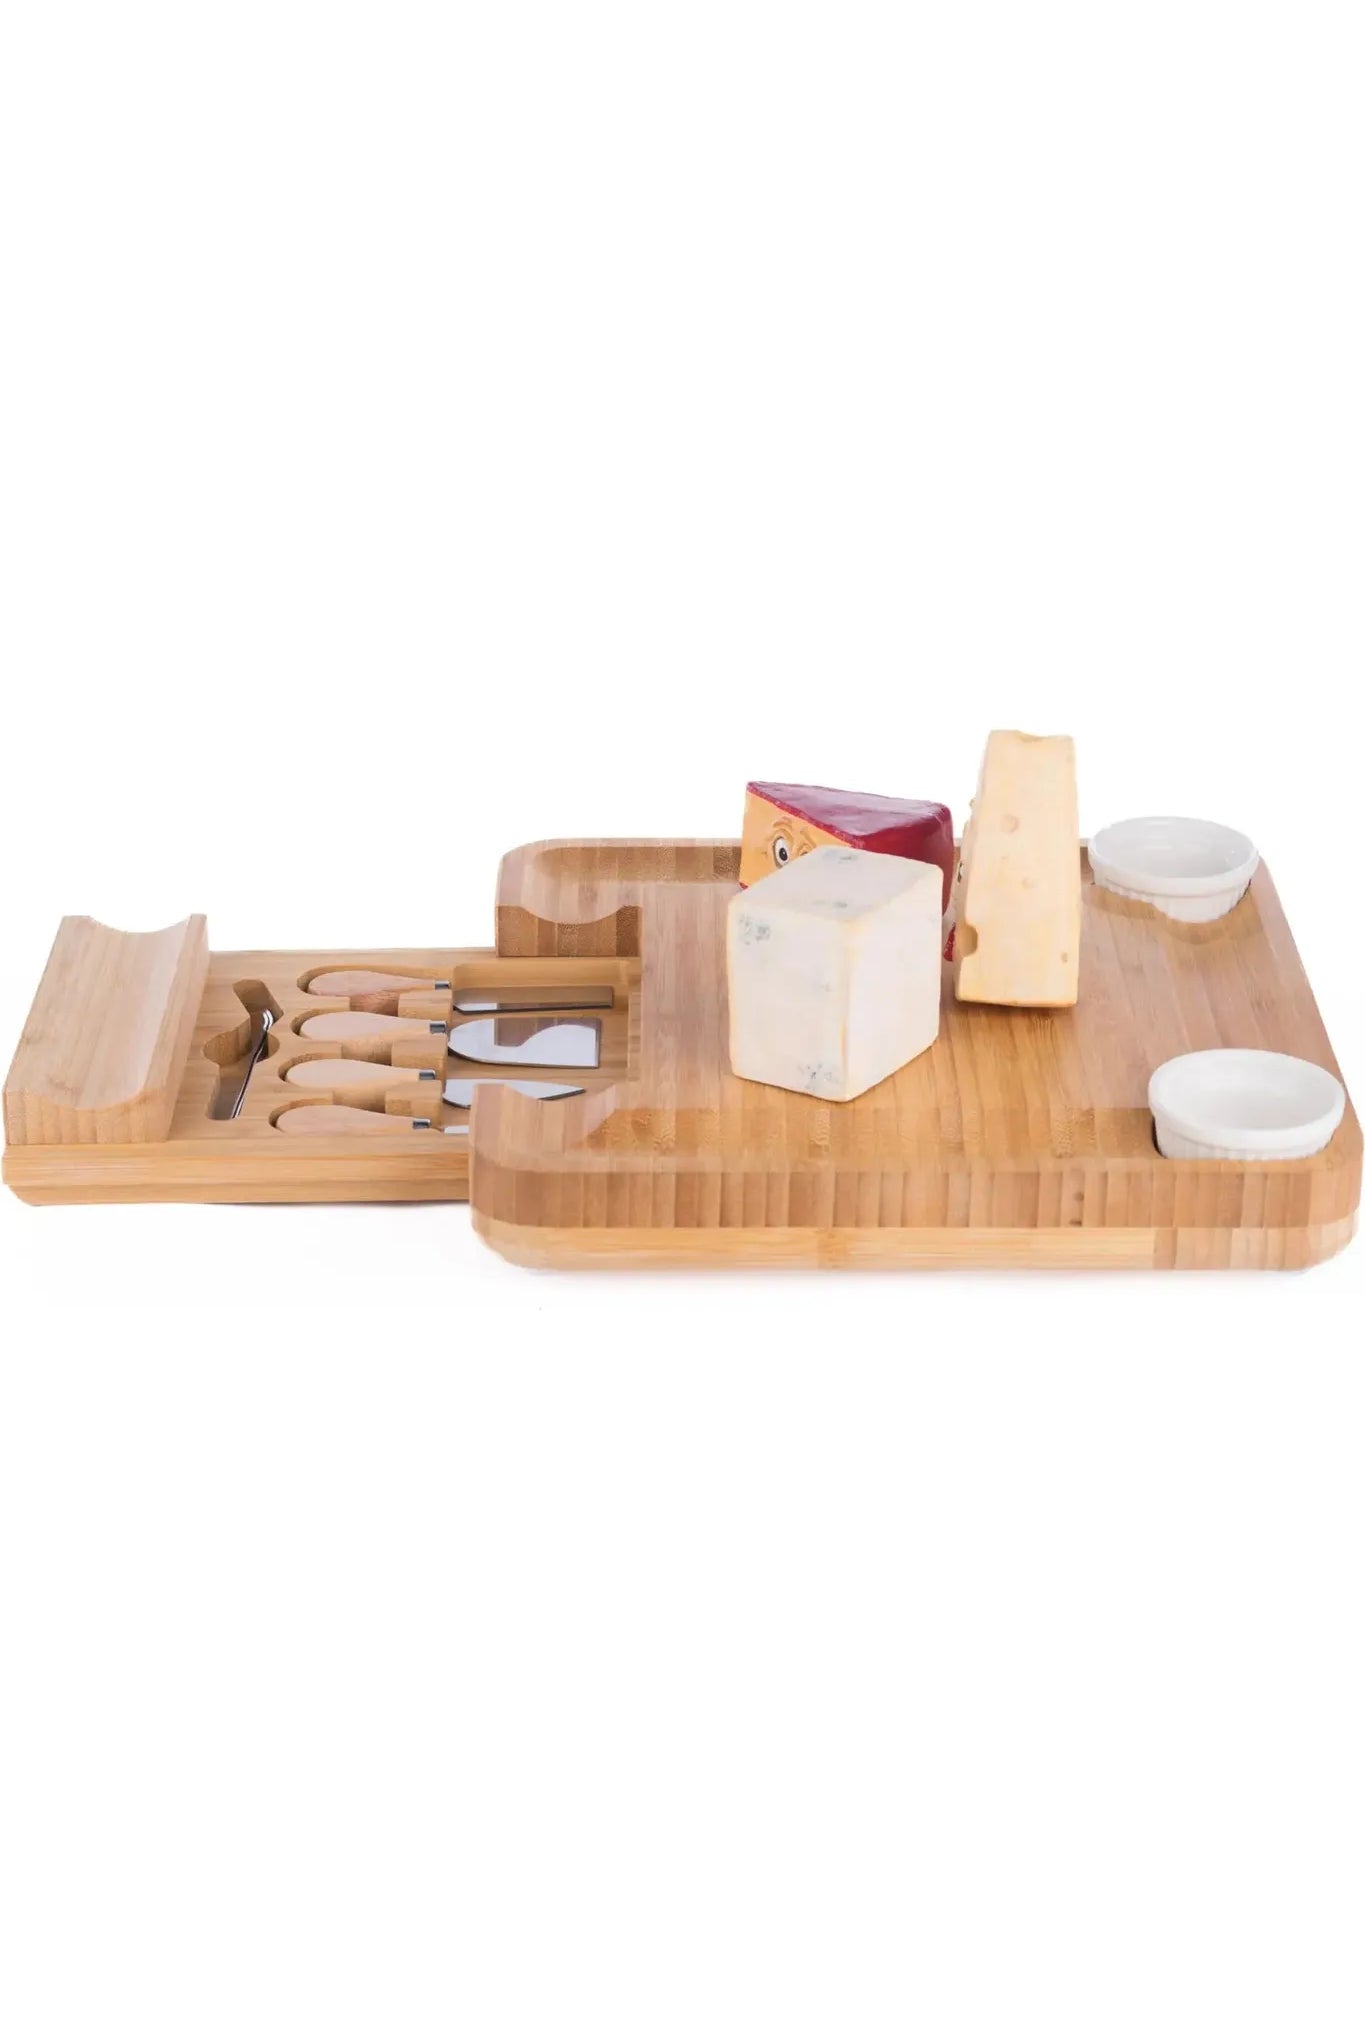 Shop For Creepy Cheeses On Charcutier Board With Knife Set 28-428199